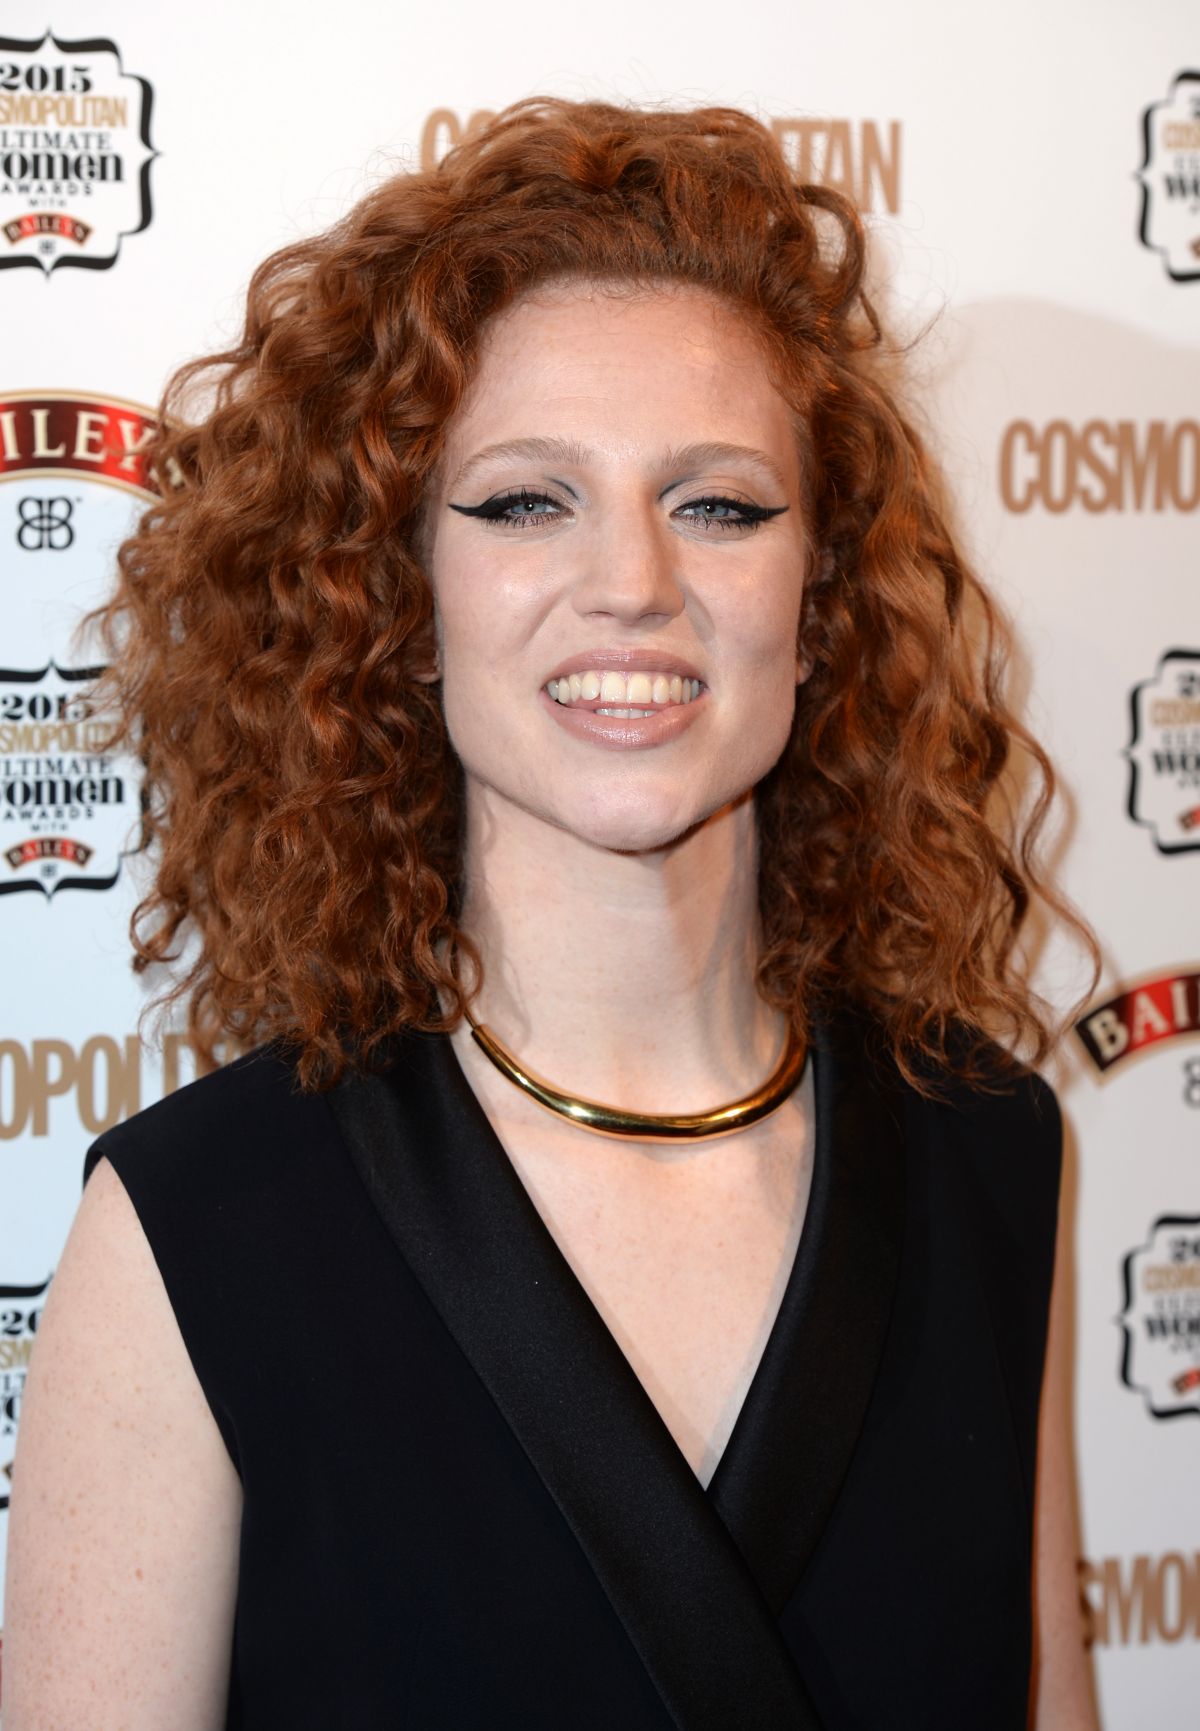 JESS GLYNNE at Cosmopolitan Ultimate Women of the Year Awards in London 12/03/2015 ...1200 x 1731